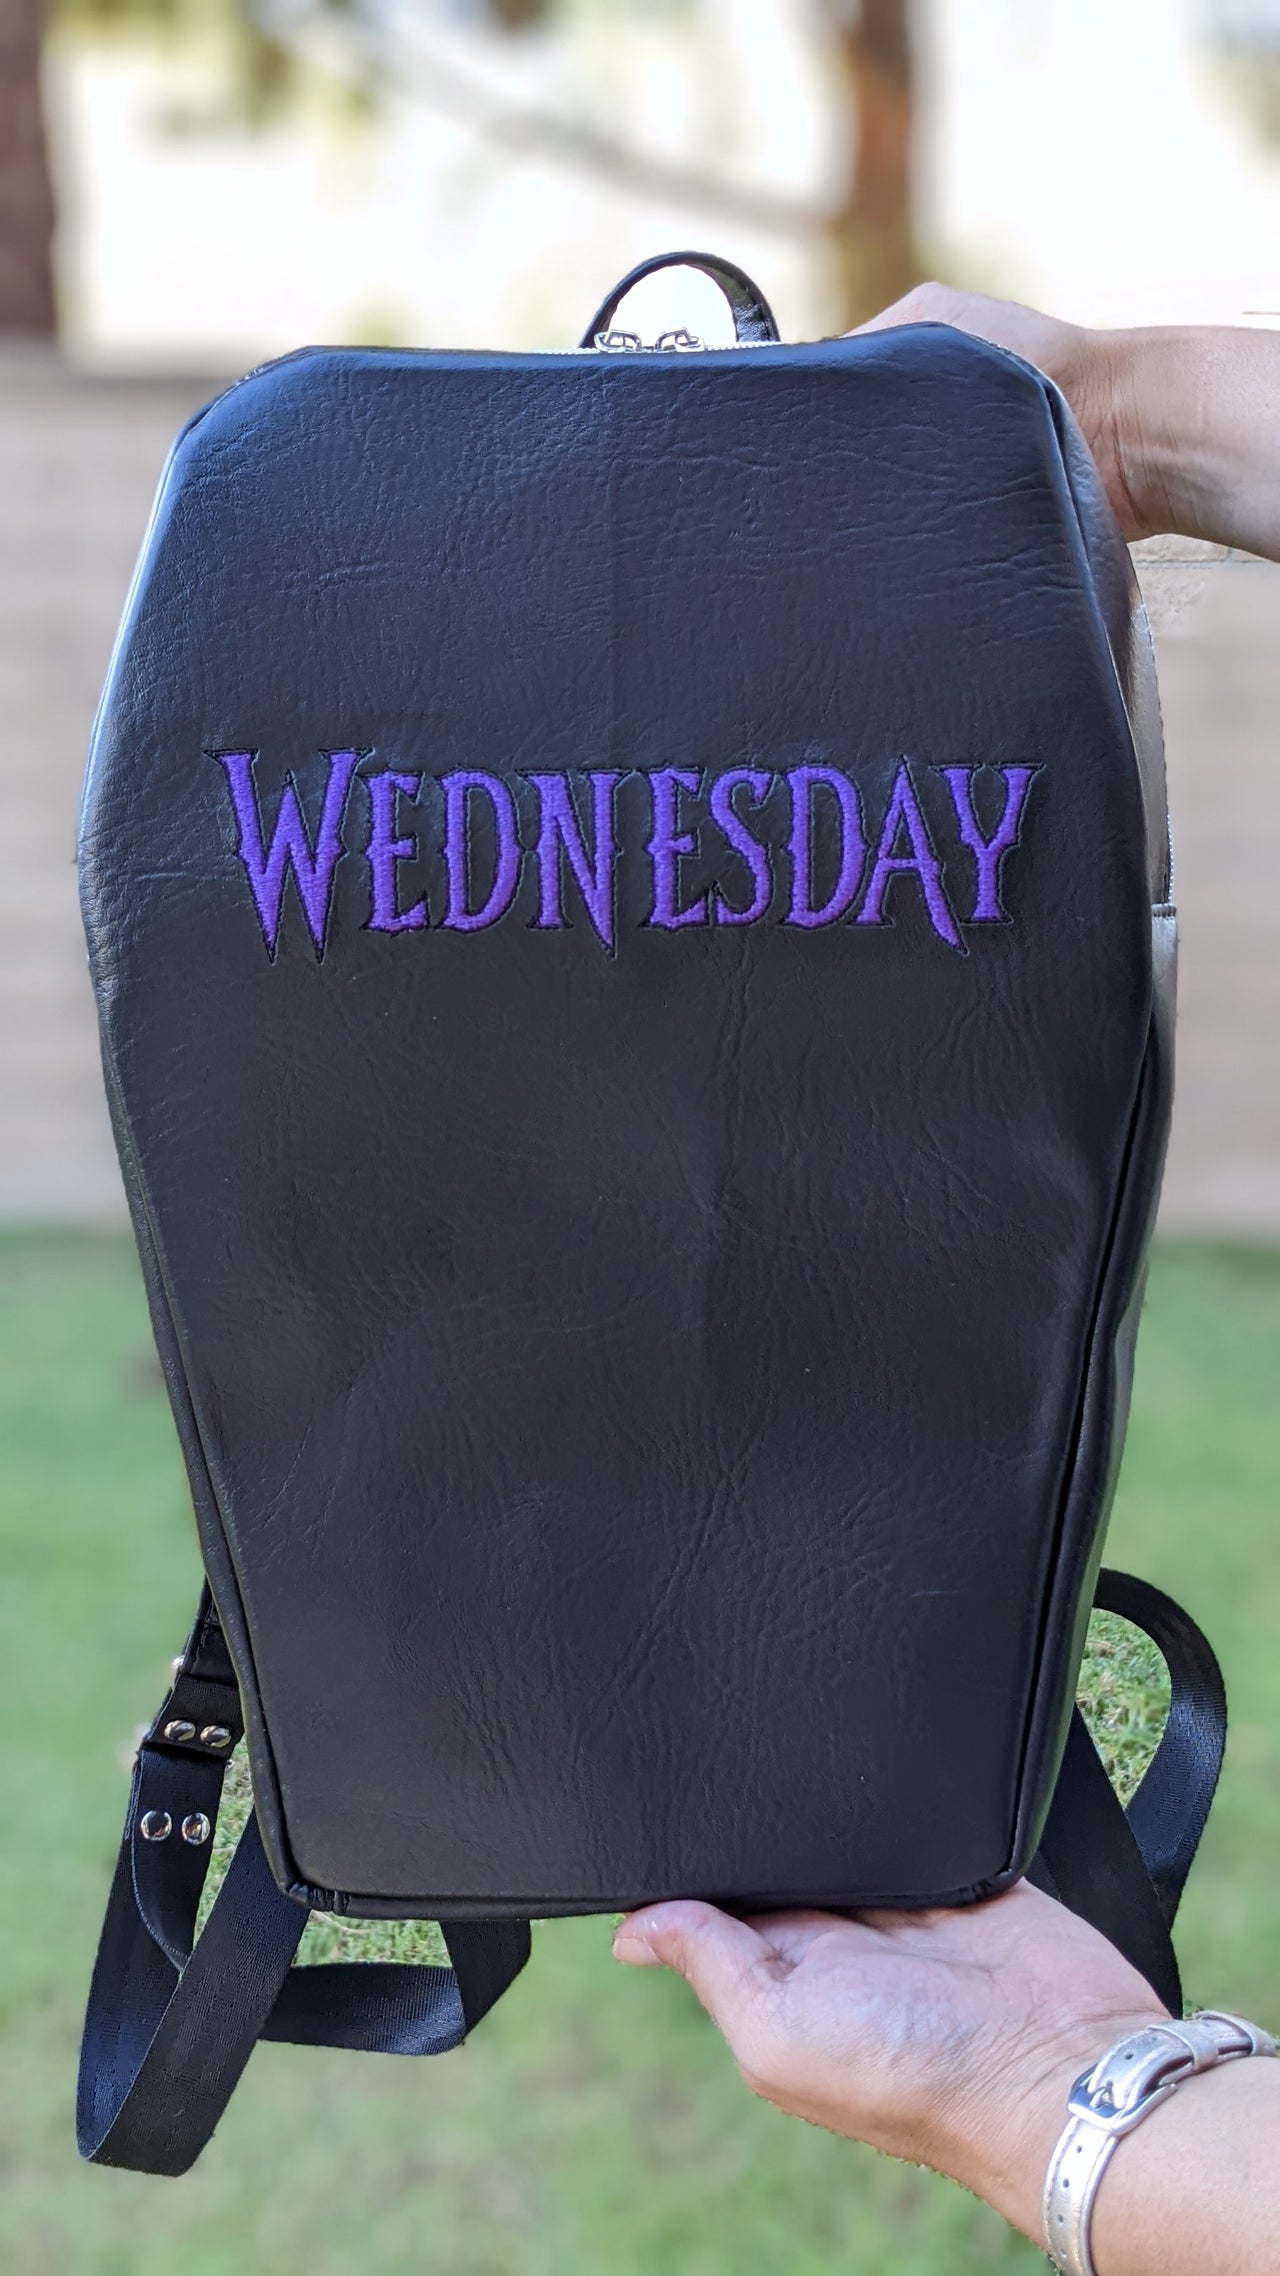 Wednesday Addams Coffin Backpack